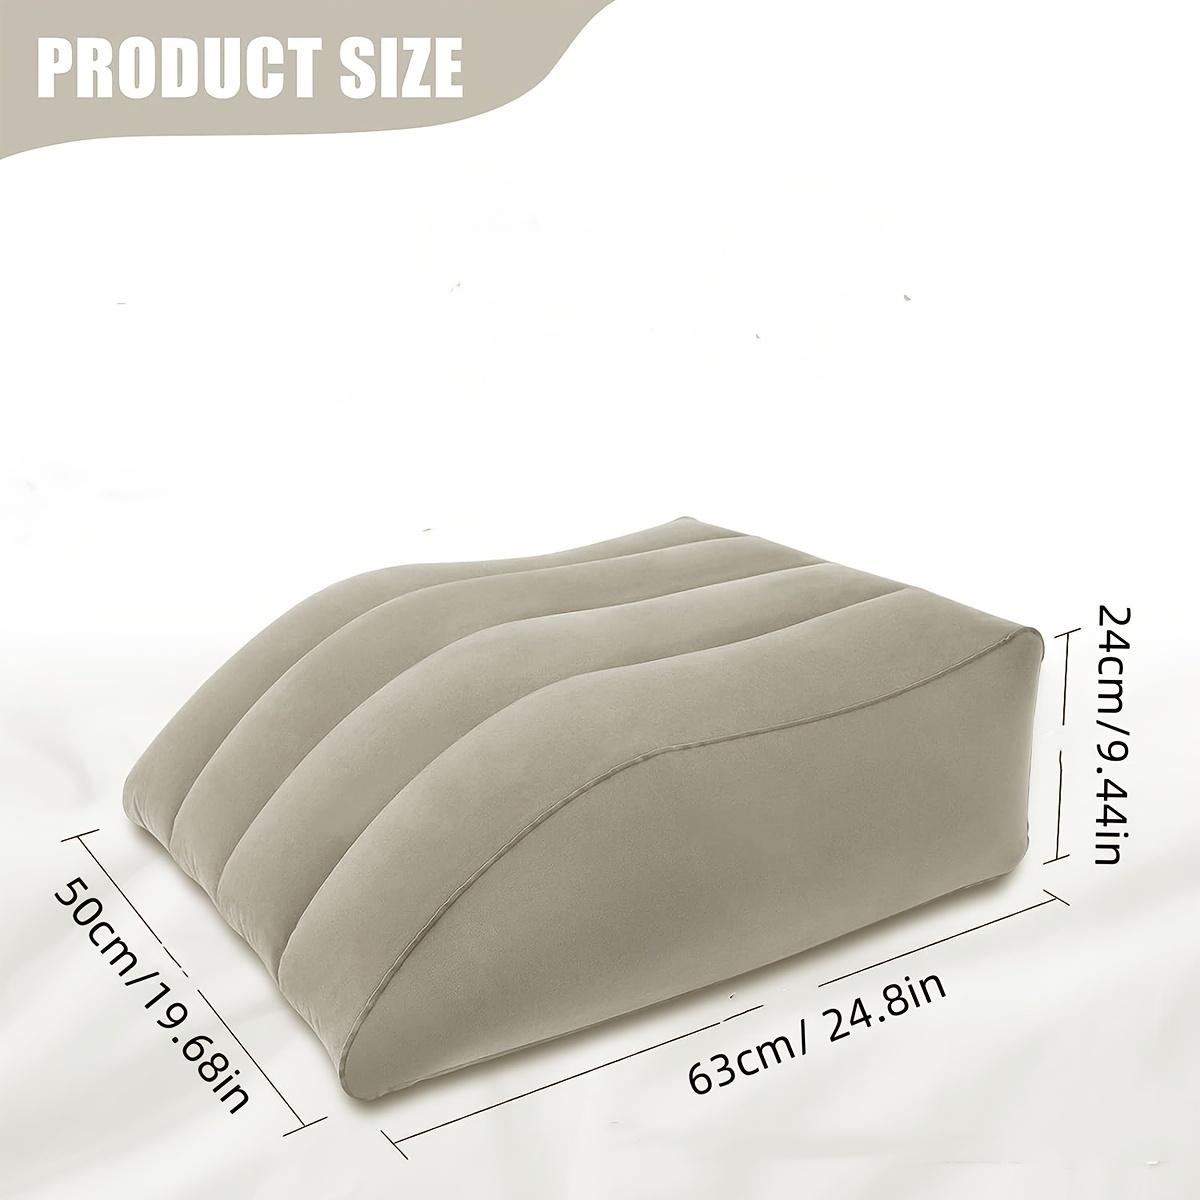 Leg Elevation Pillow, Inflatable Wedge Pillows, Comfort Leg Pillows for  Sleeping, Improve Circulataion and Reduce Swelling, Suitable for improving  Sleep Quality 